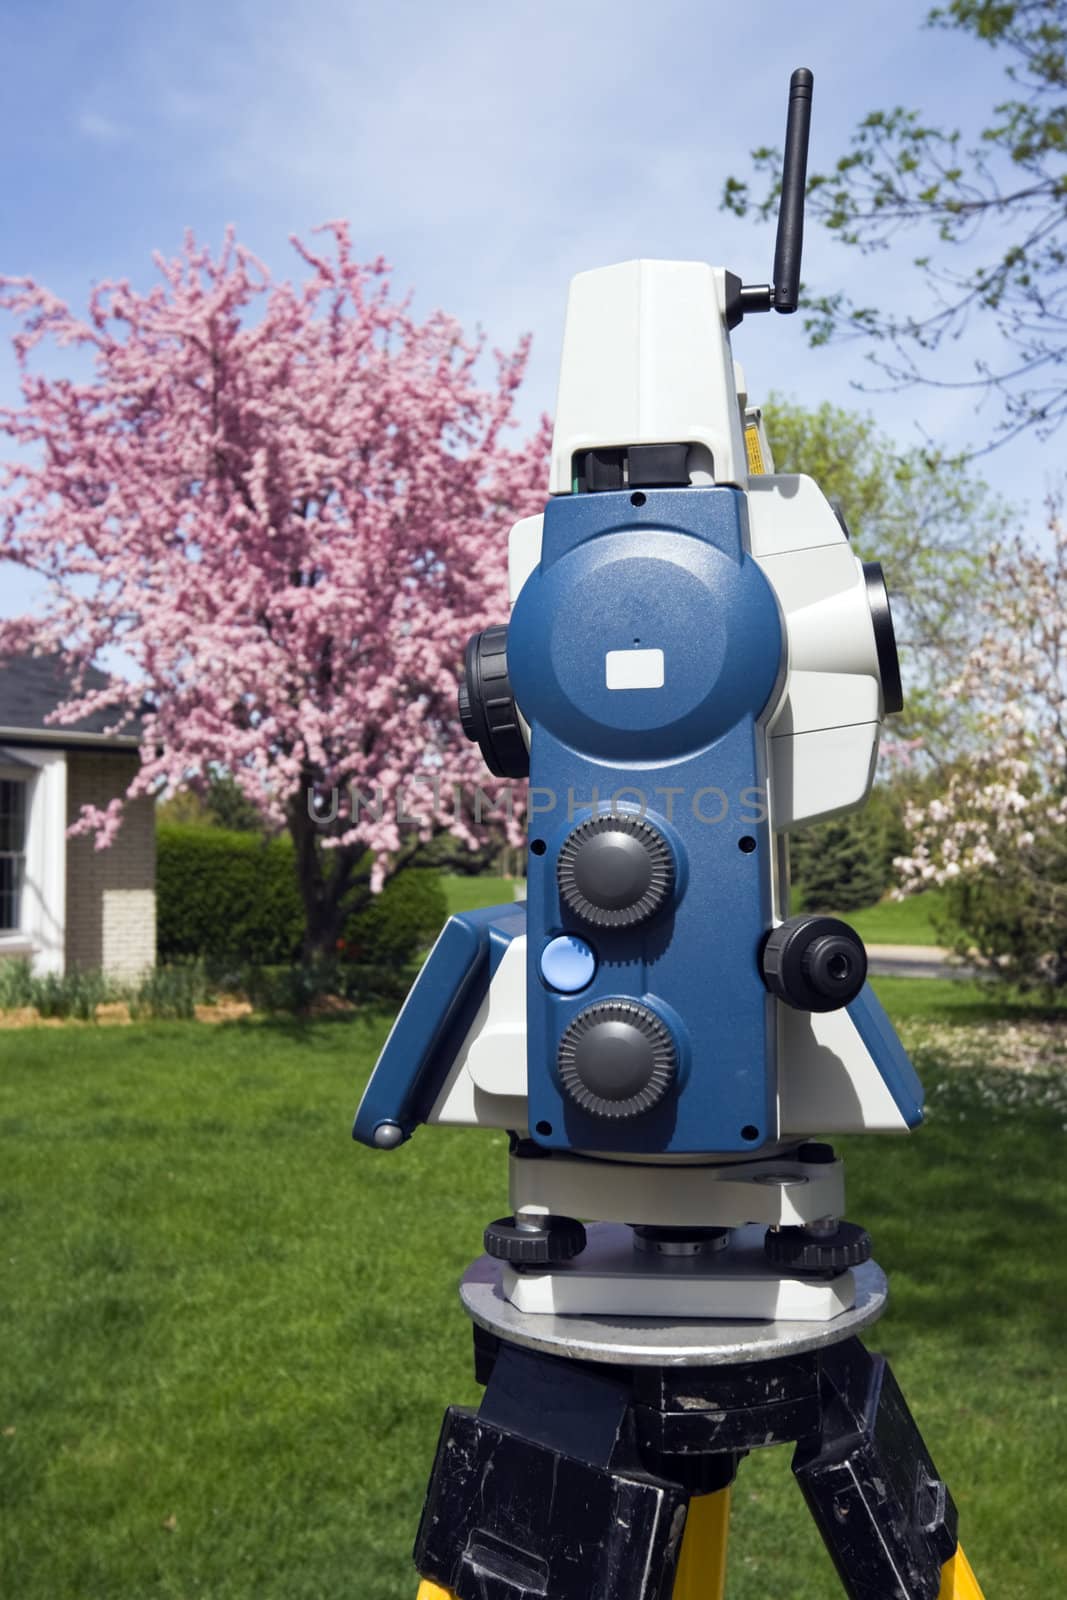 Theodolite and spring colors on trees.